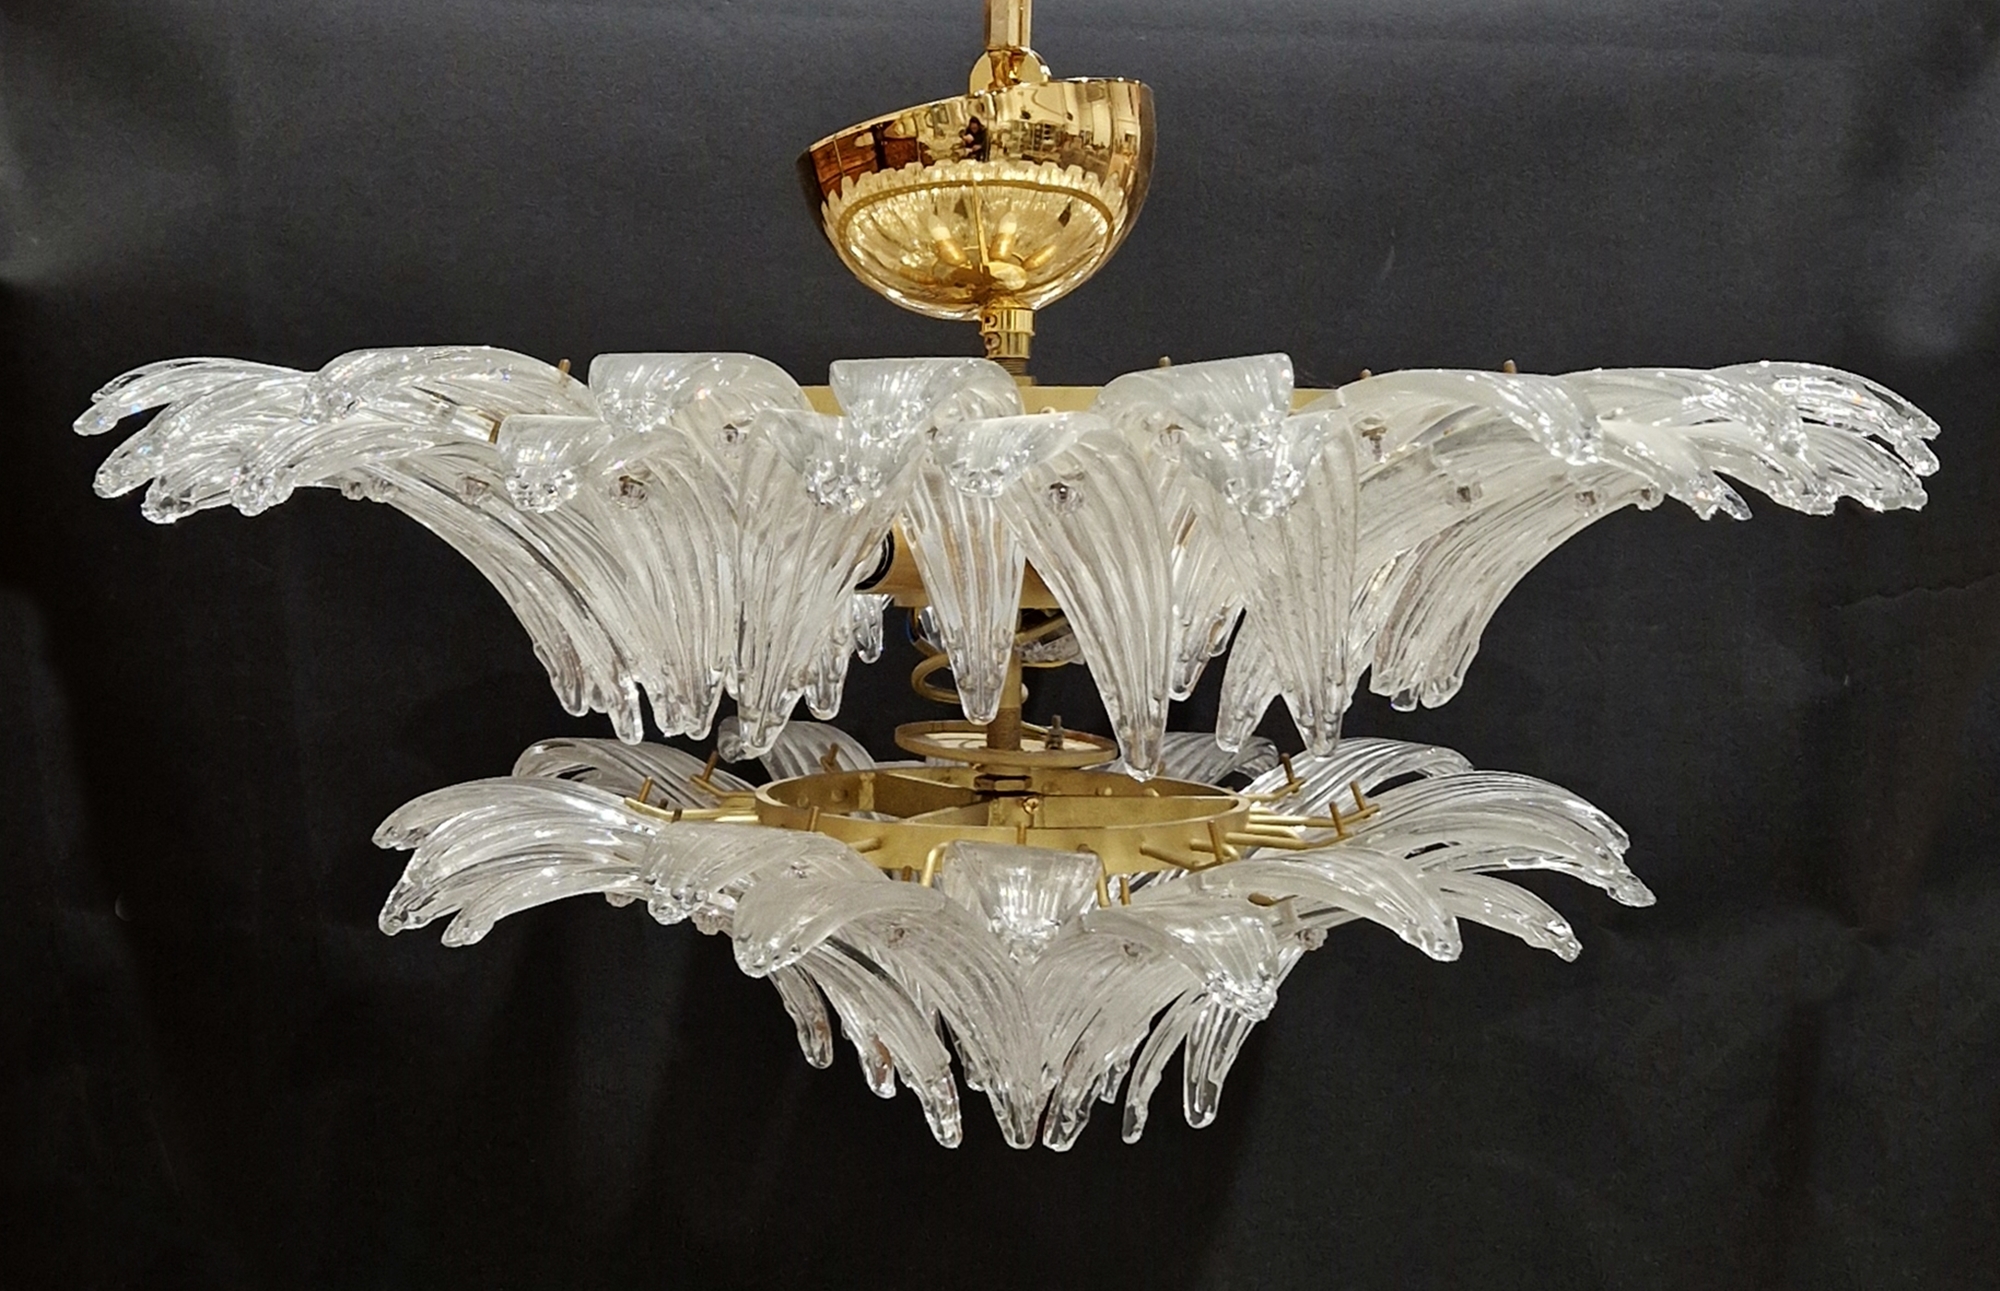 Barovier & Toso Murano glass 'Palmette' two tier suspension lamp/electrolier, model number 5310-5, - Image 2 of 2